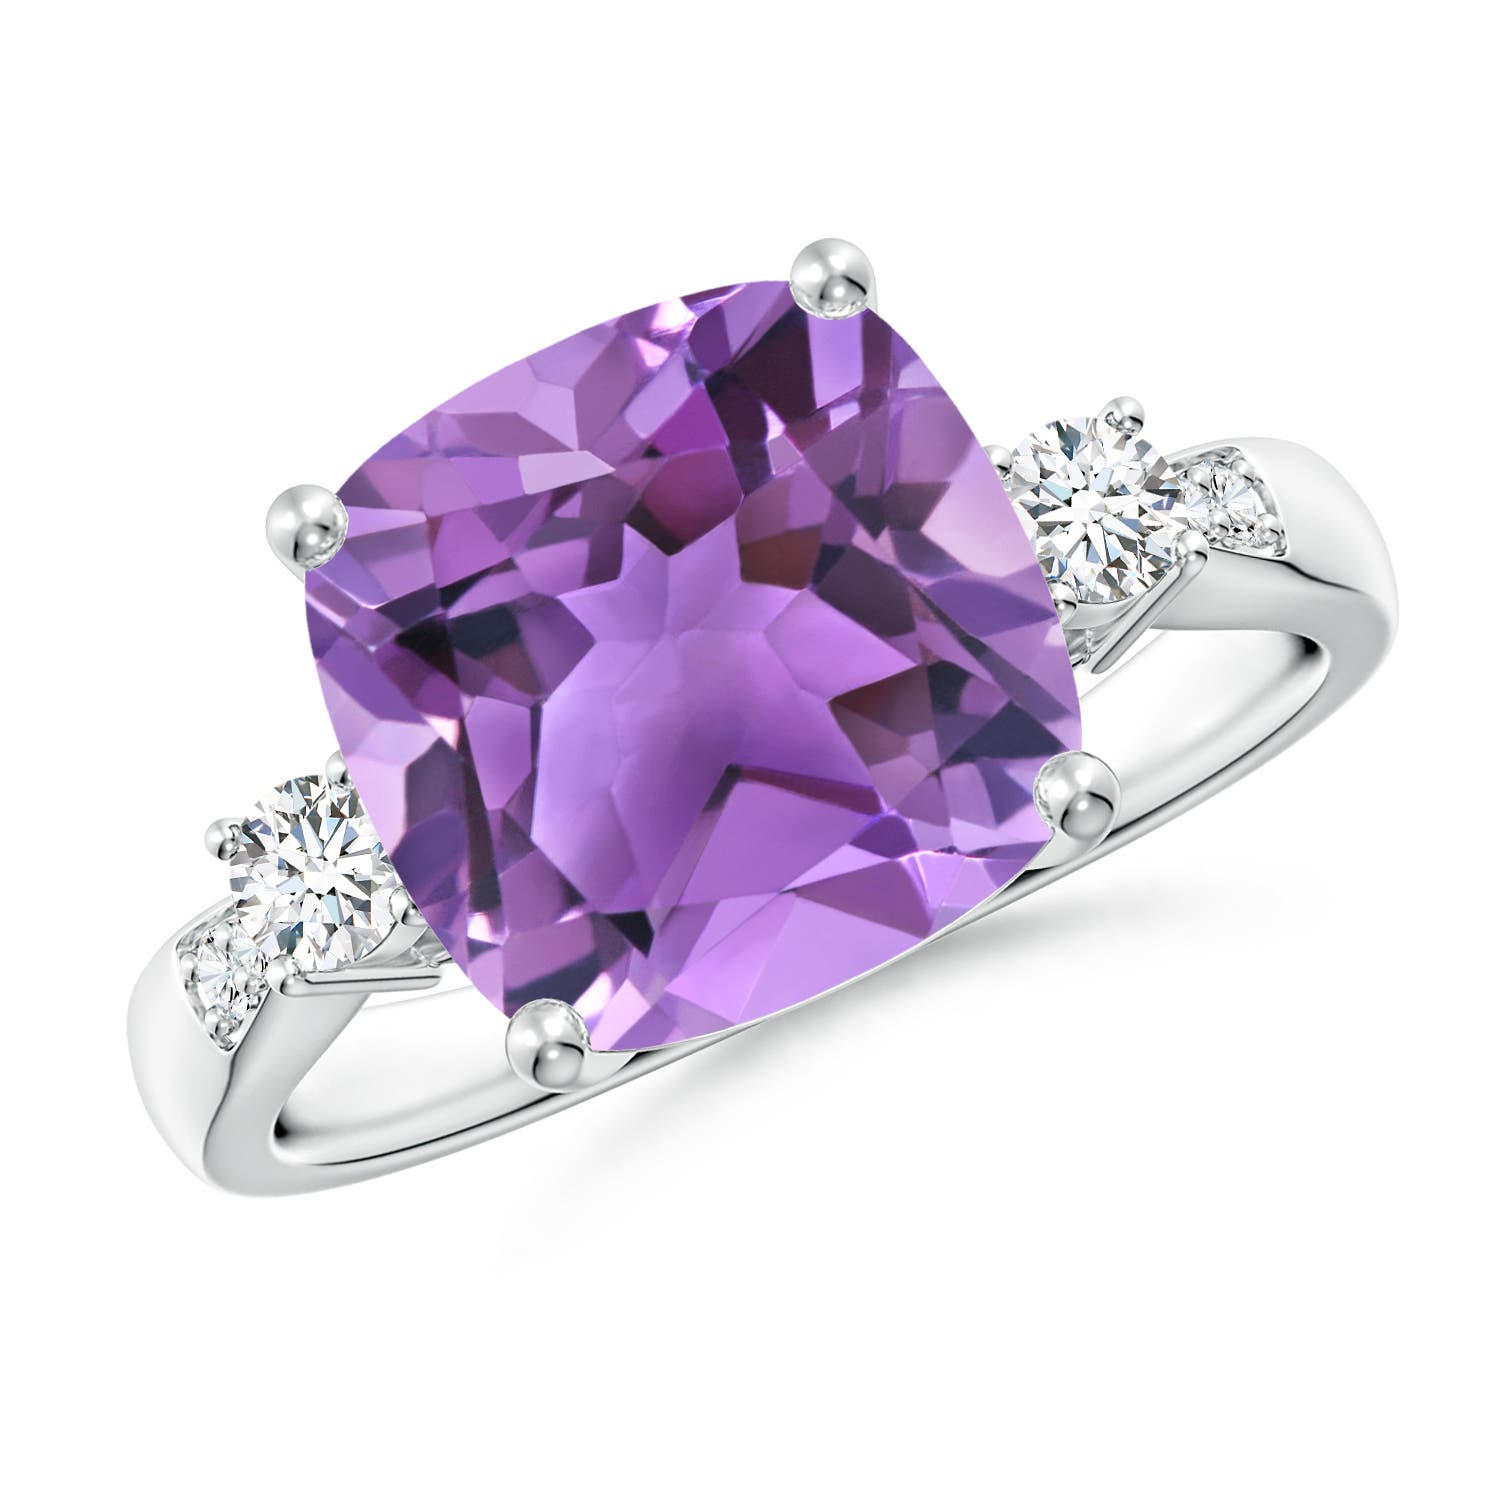 AA - Amethyst / 3.85 CT / 14 KT White Gold